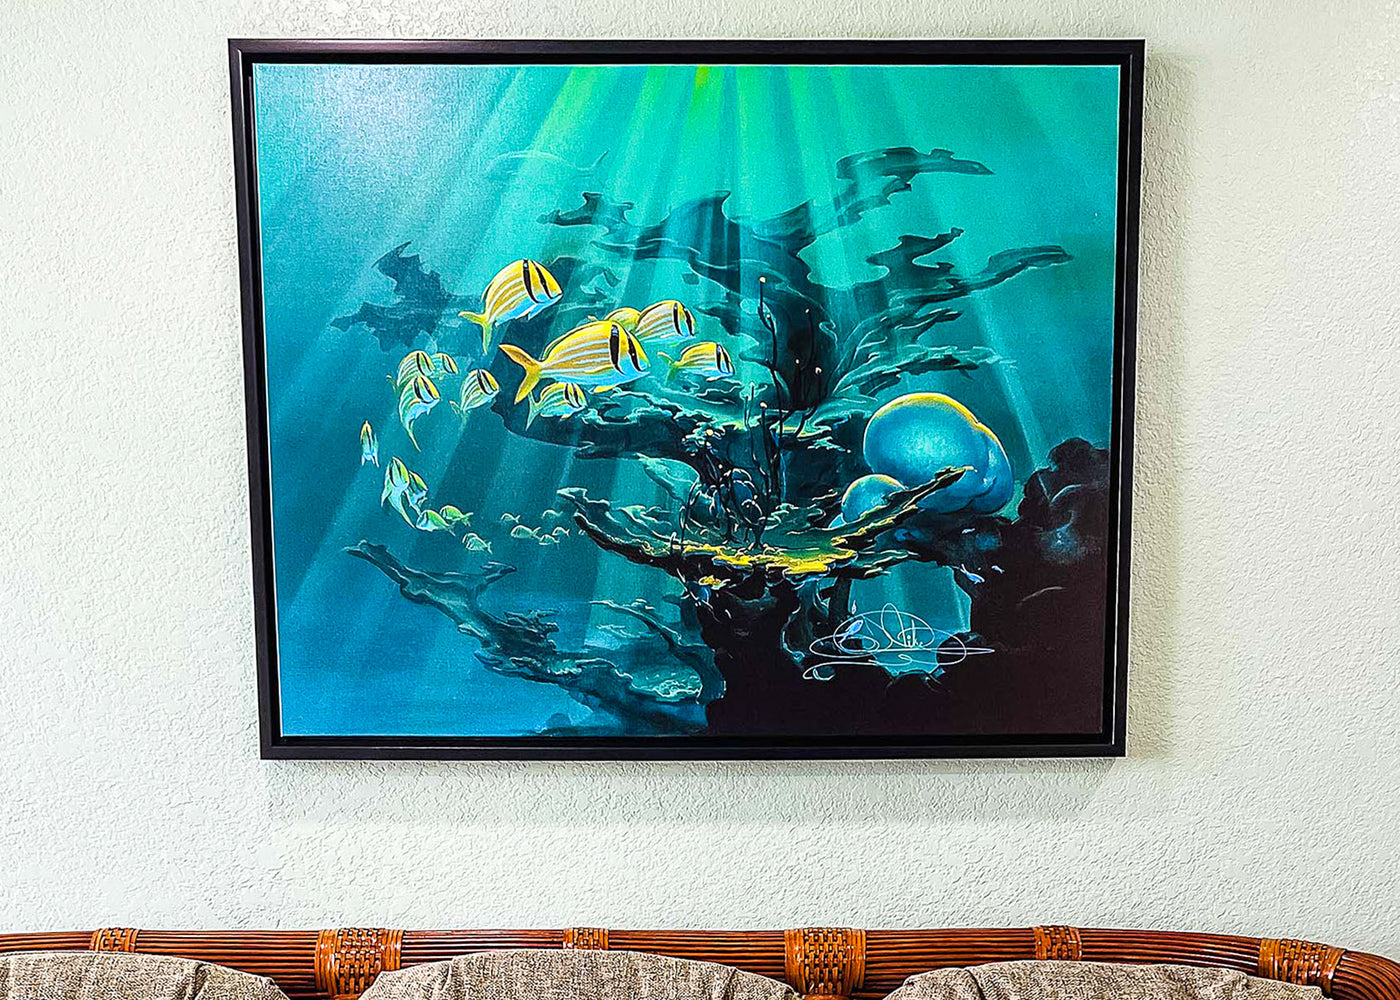 John Pitre's "Atlantic Reef" is an oil on canvas that depicts the life found in the shallow coral-laden waters that abound in the tropical seas of our world.